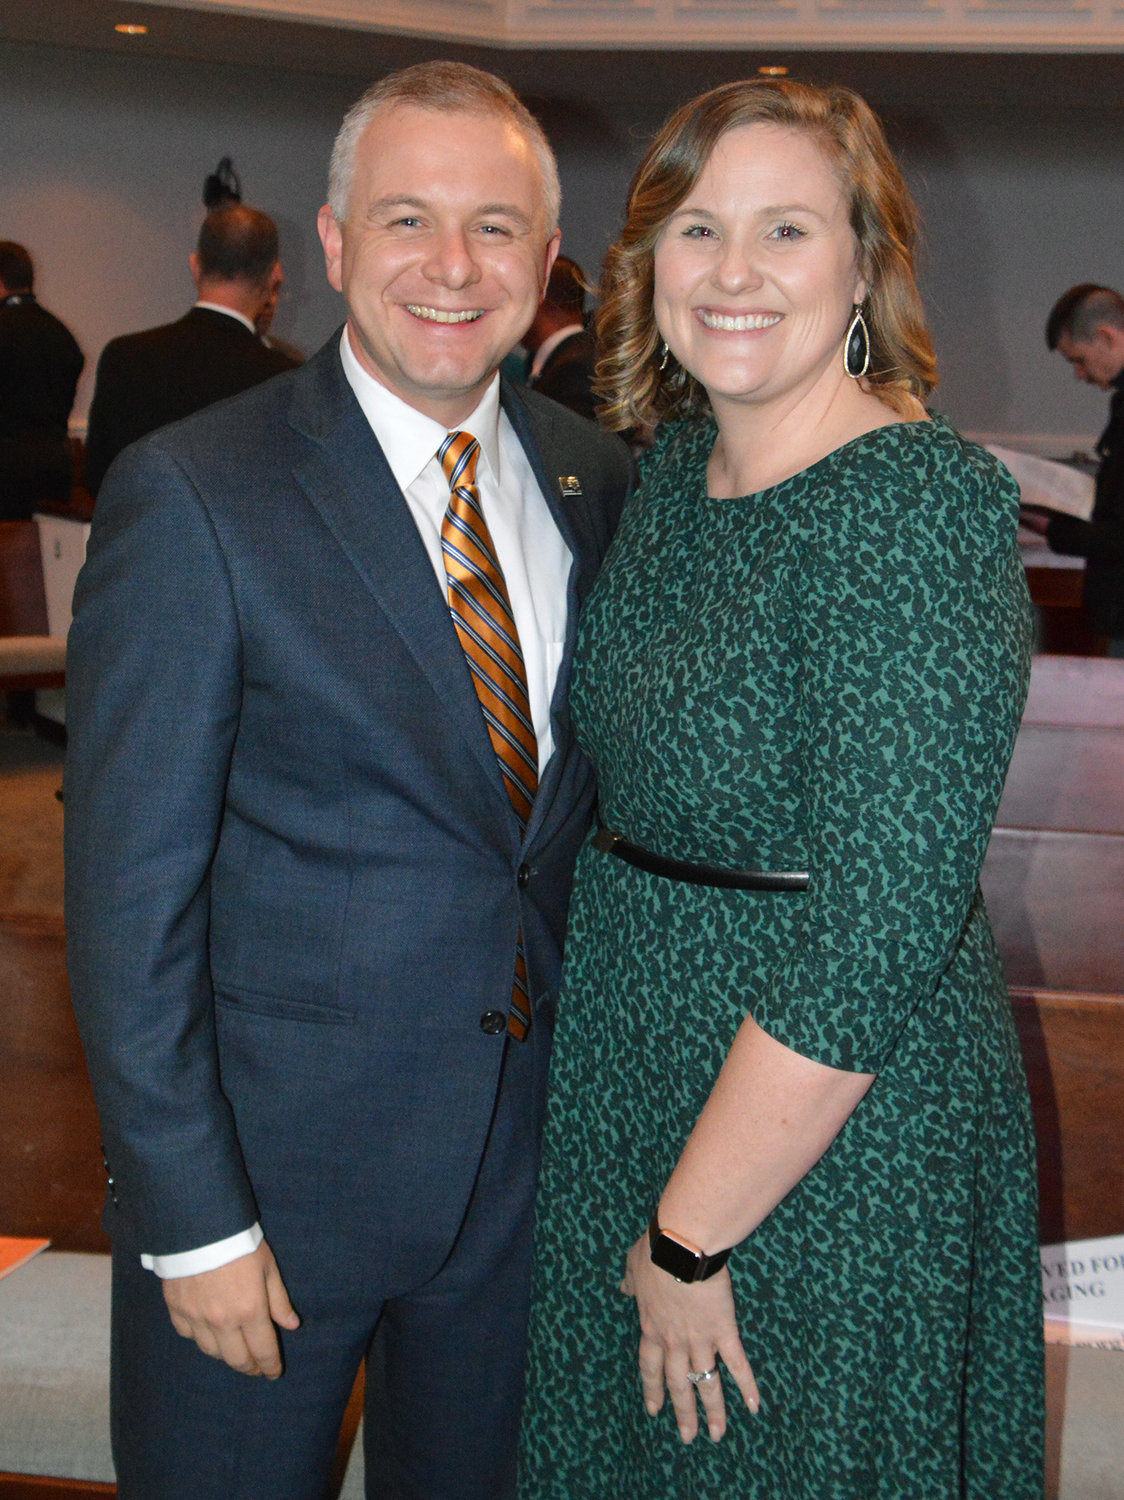 Newly elected Georgia Baptist Convention President Josh Saefkow poses with his wife Kelsie at the conclusion of the 200th annual meeting of the GBC in Augusta, Ga., Tuesday, Nov. 15, 2022. (The Index/Henry Durand)